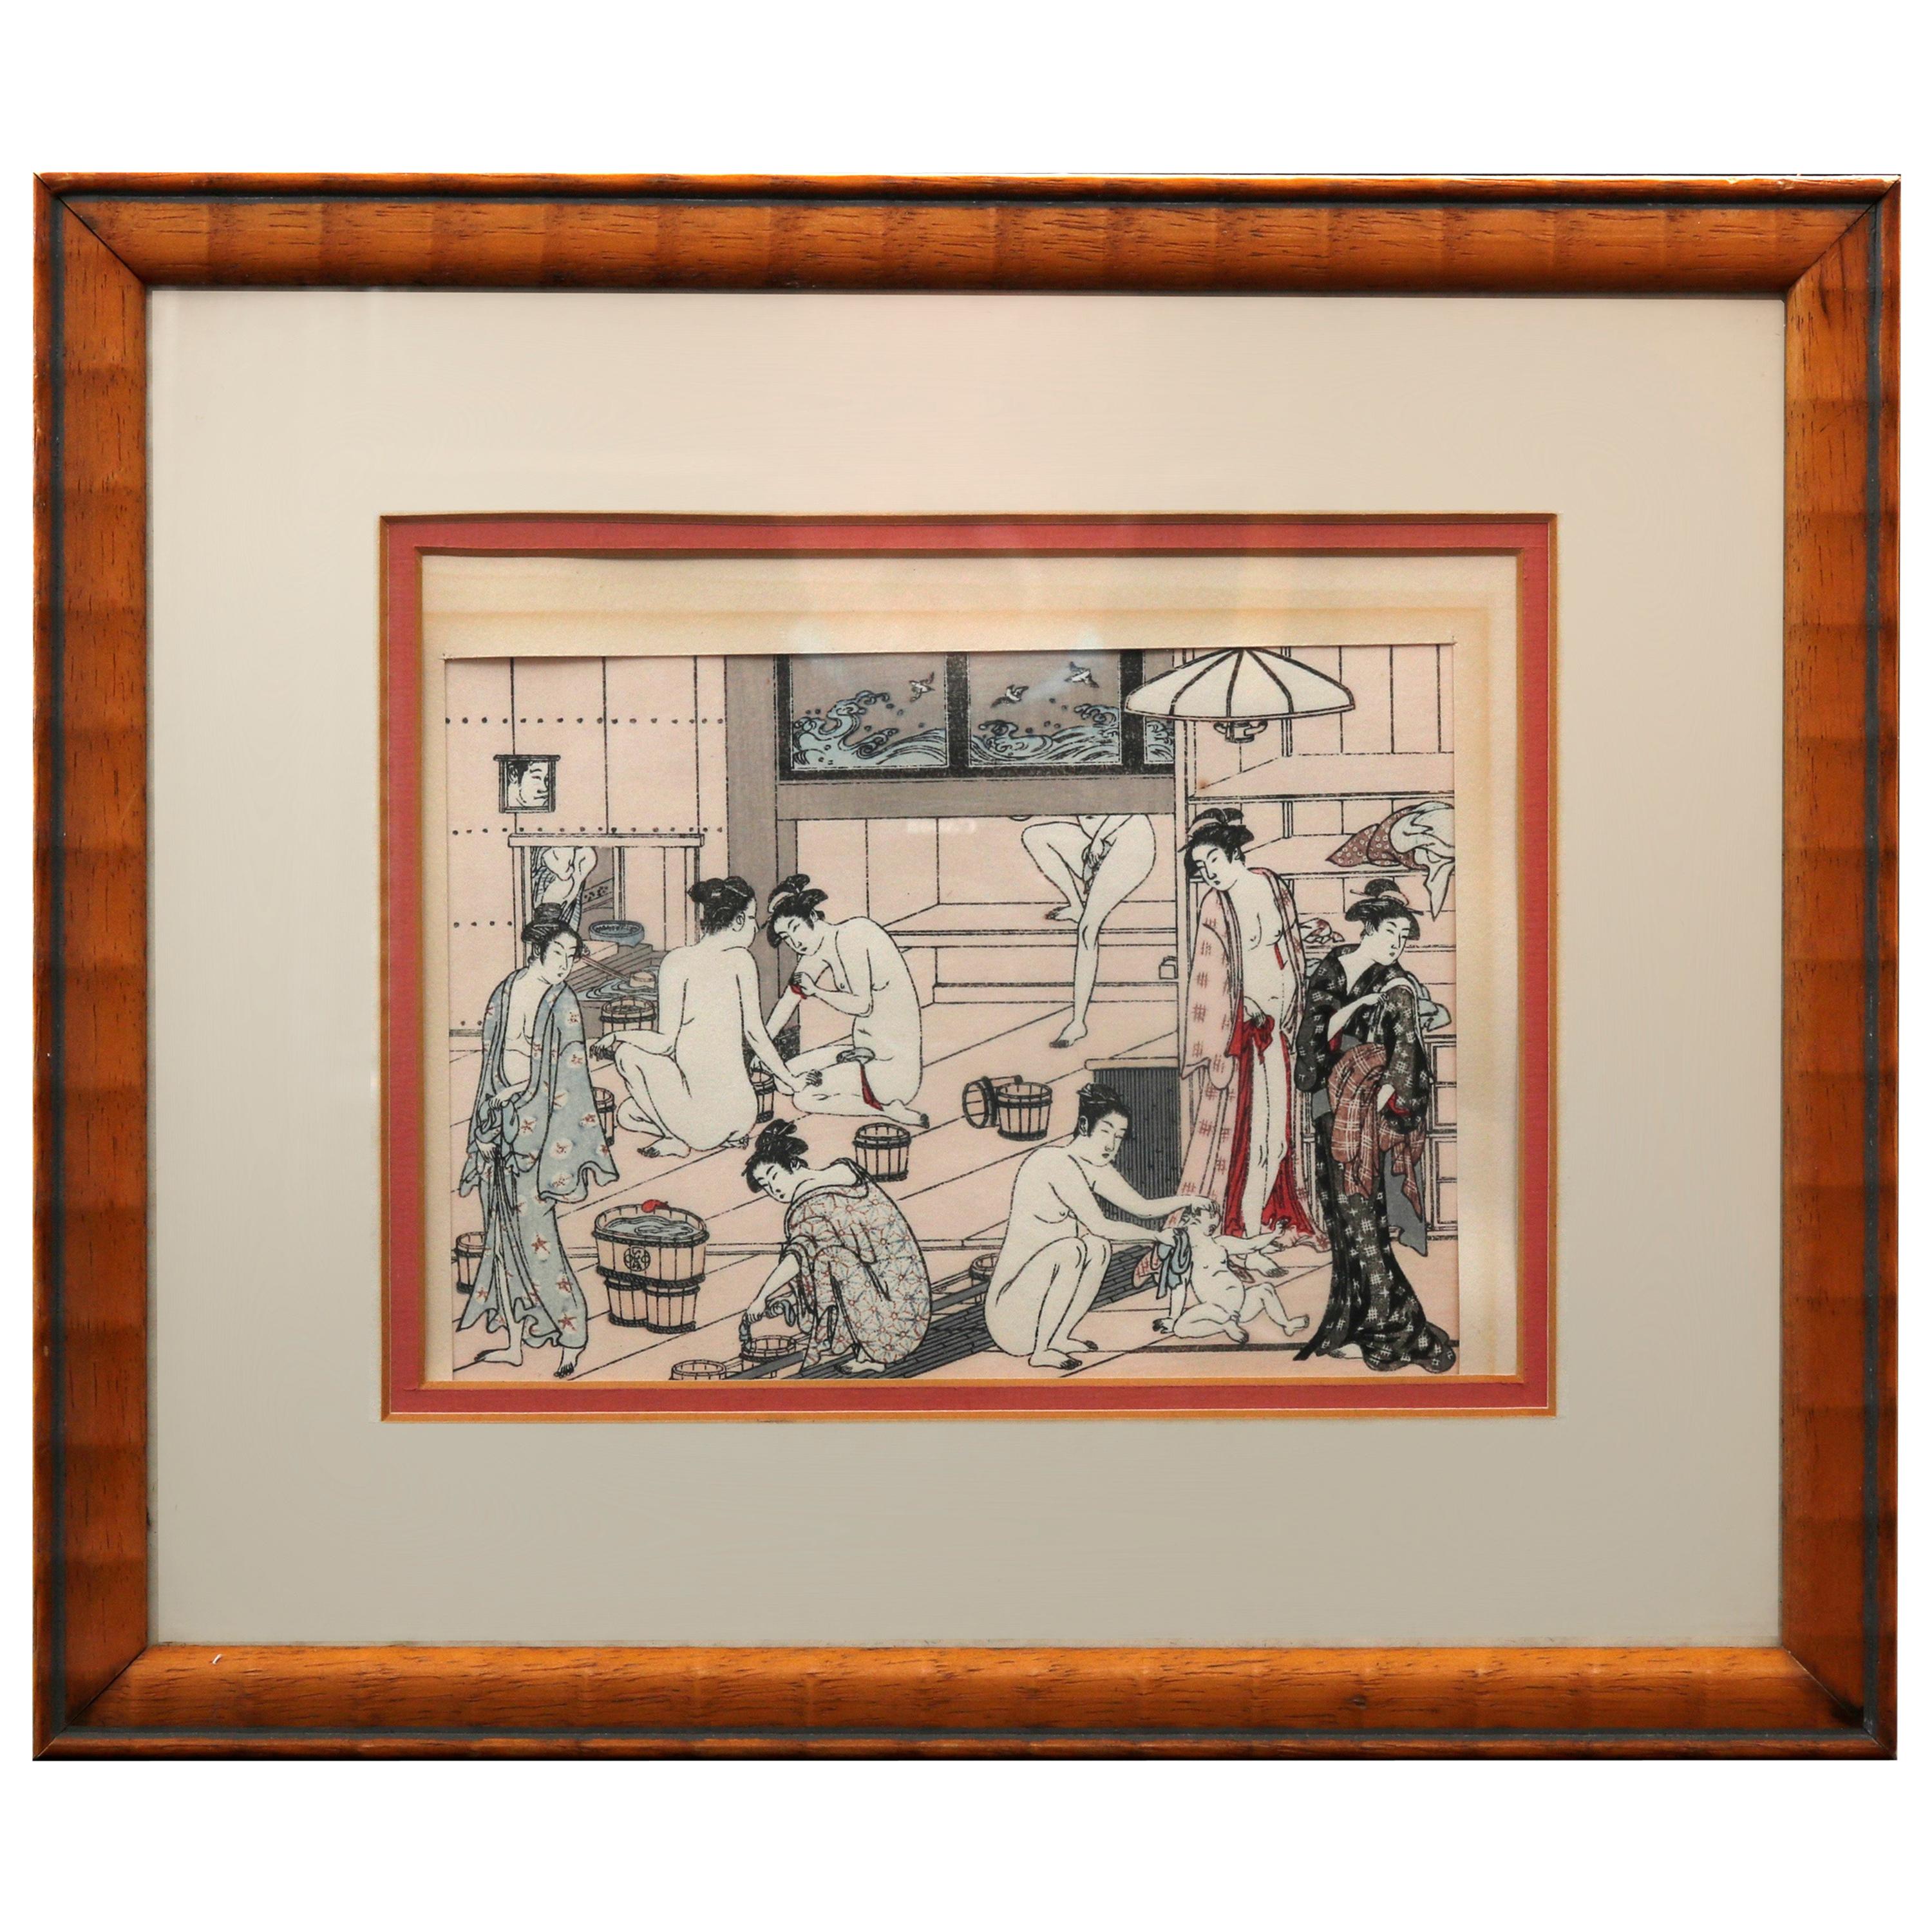 Vintage Japanese Woodblock Print of Bath House with Figures, 20th Century